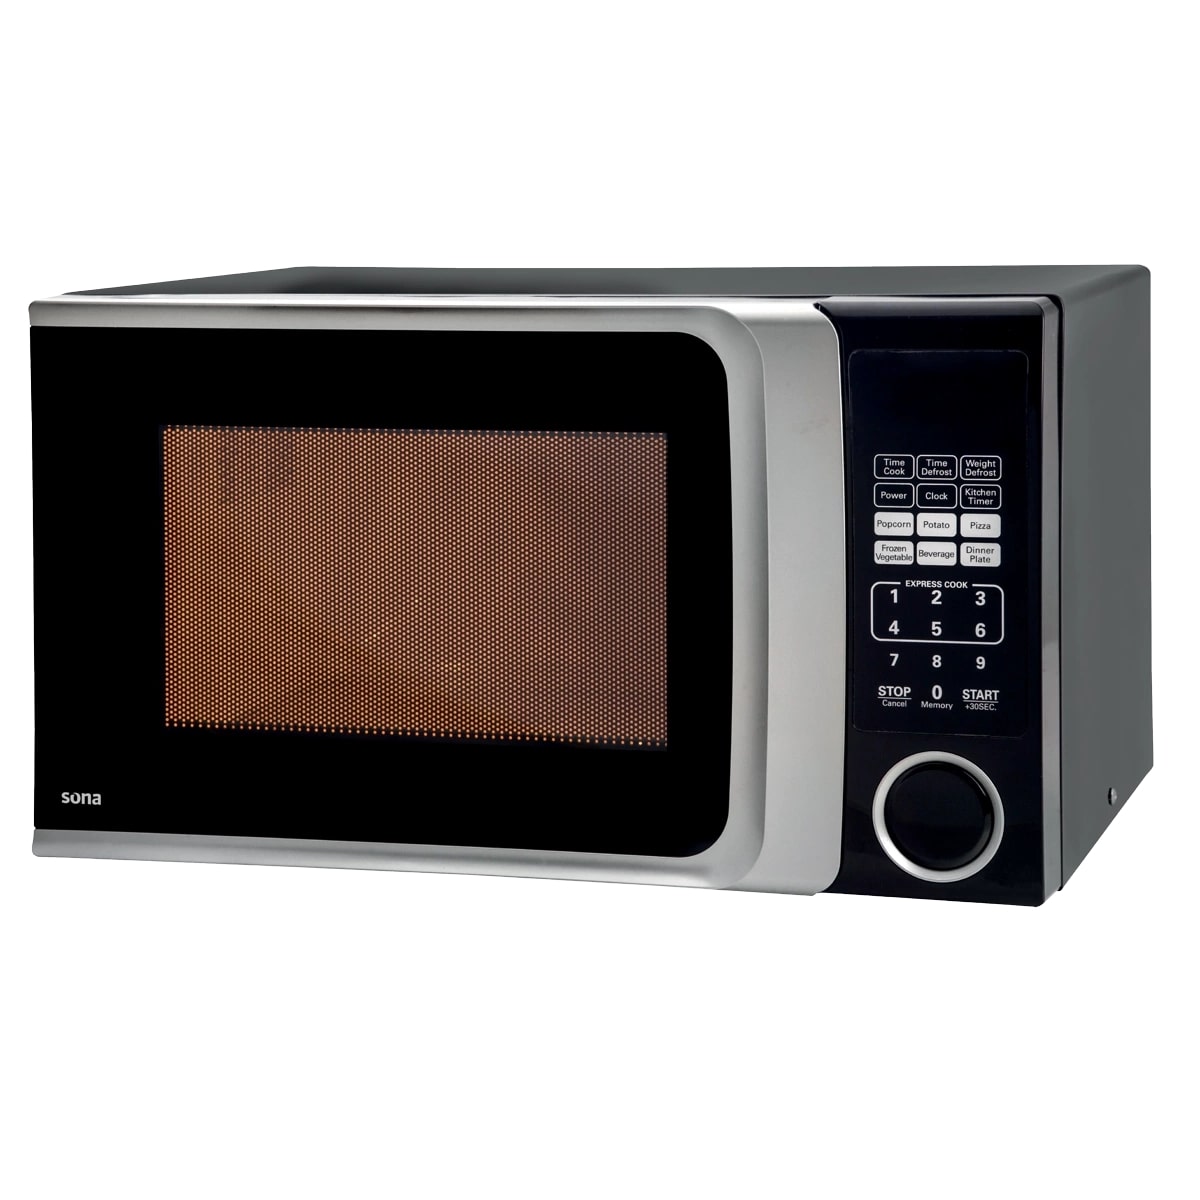 Sona Microwave Oven 25 L